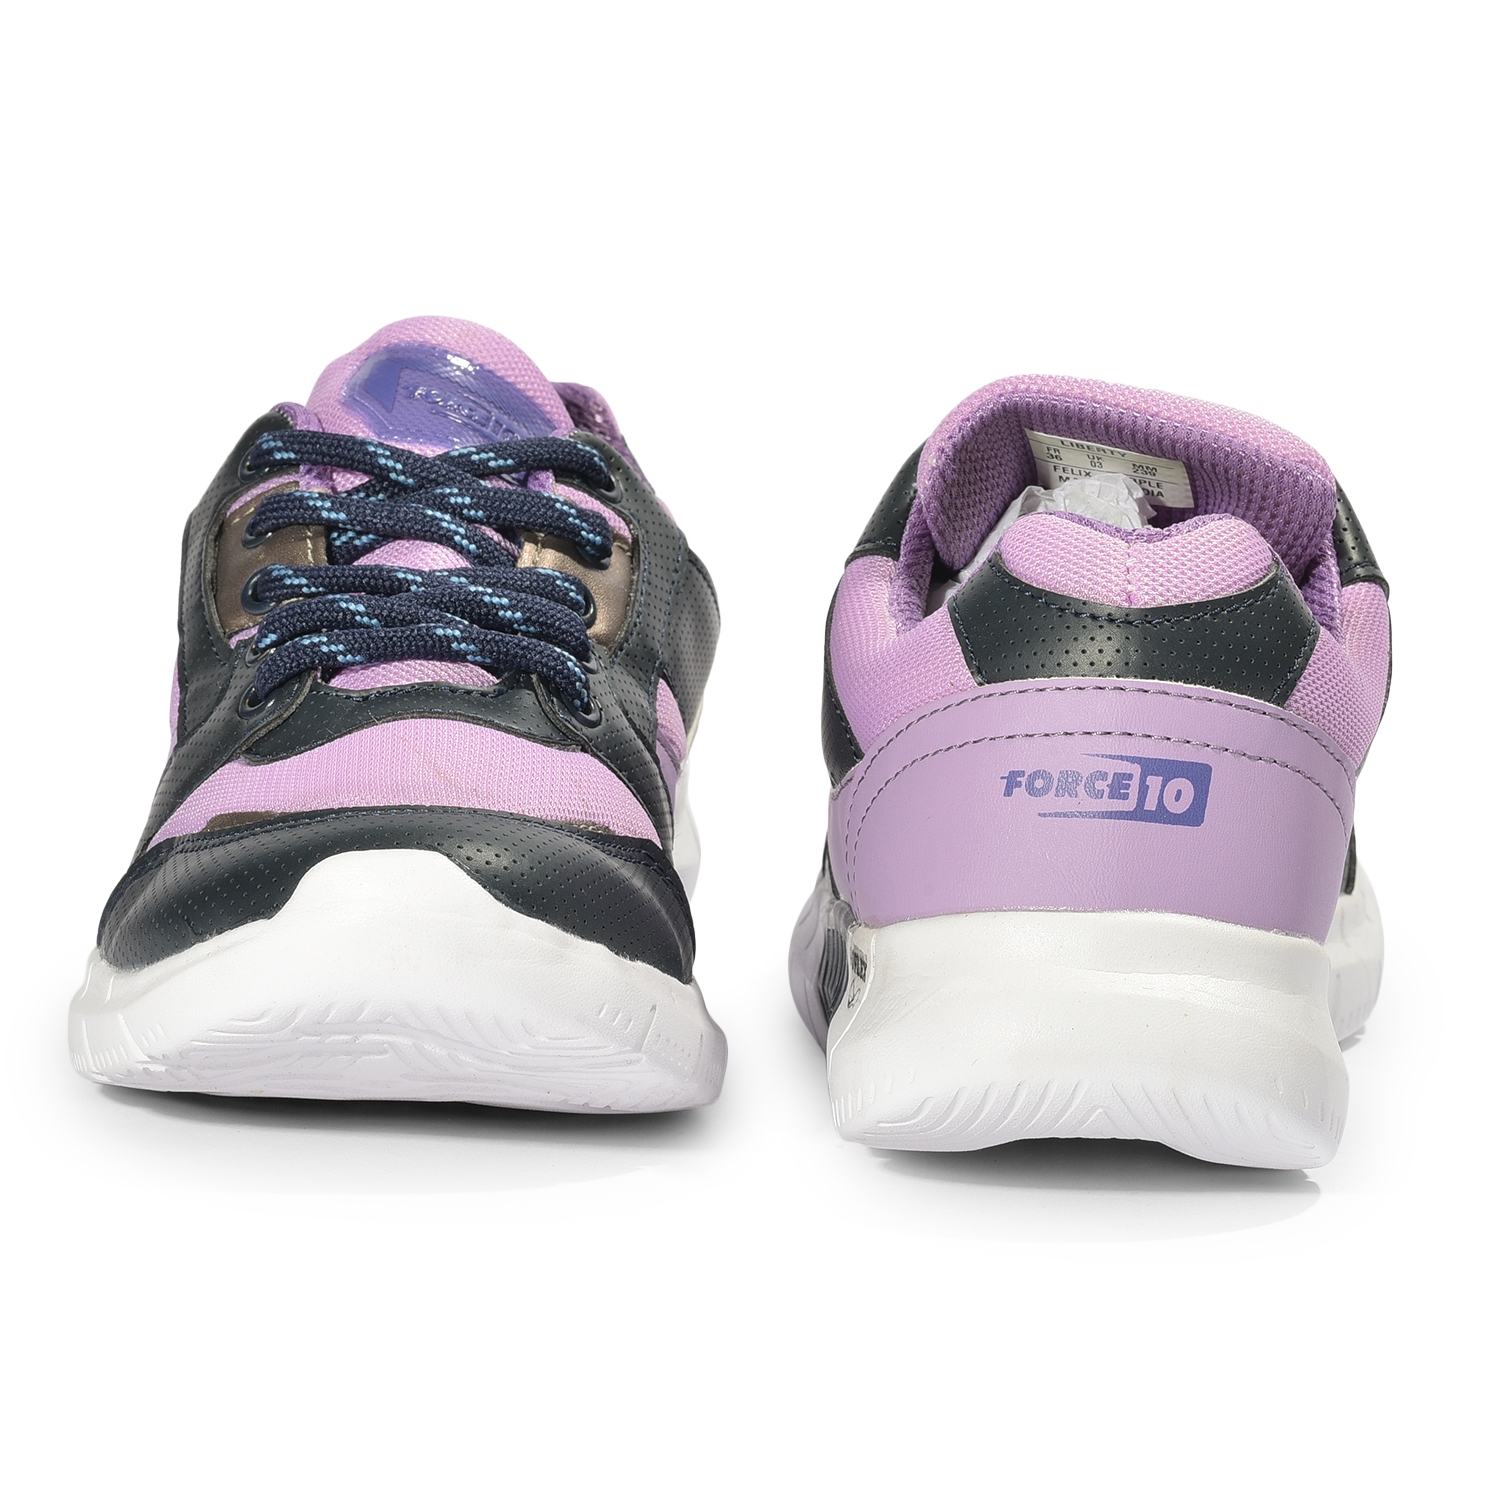 Liberty | Force 10 By Liberty Running Shoes FELIX_Purple For :- Women